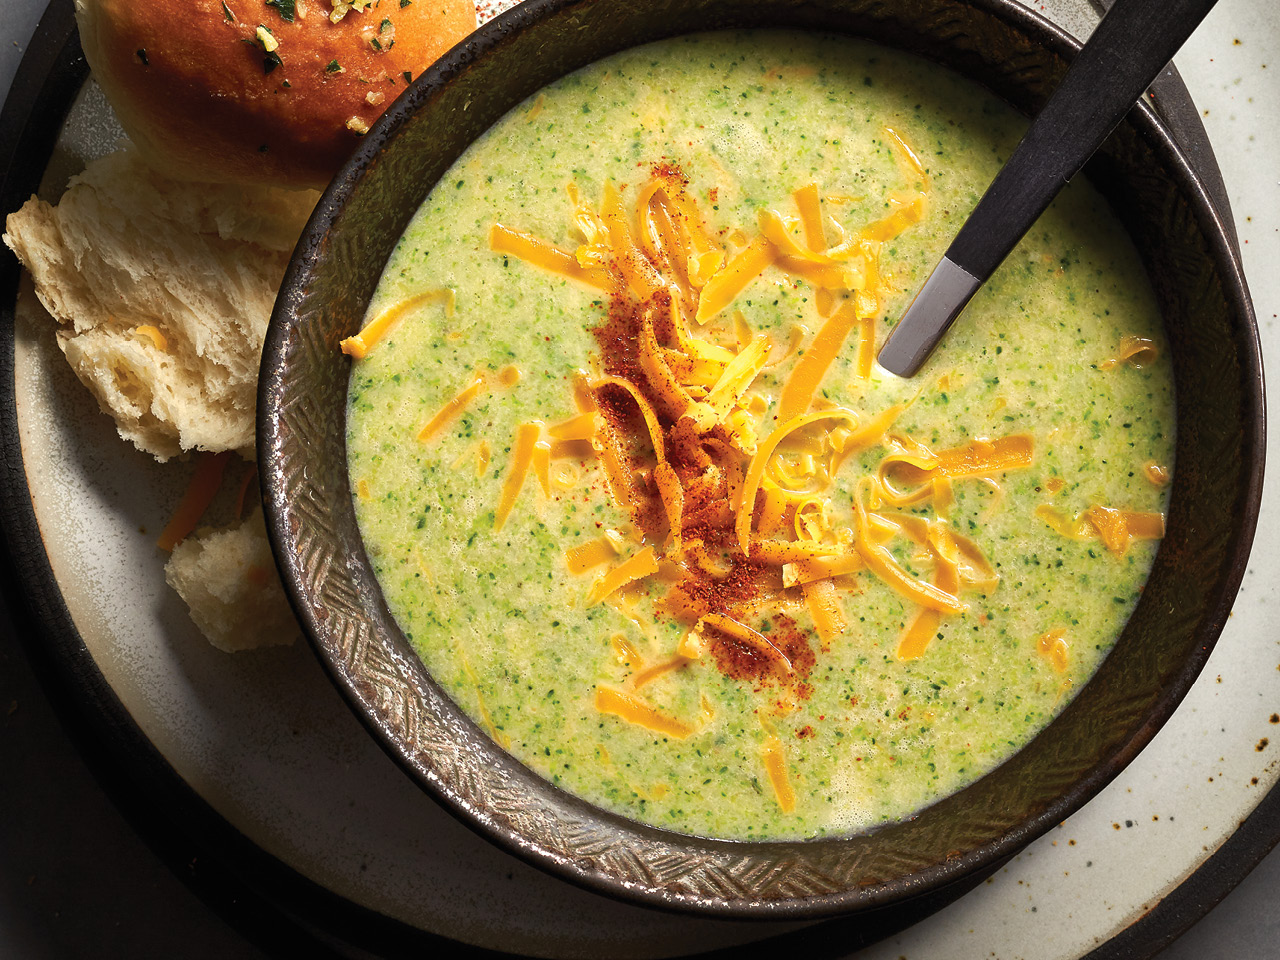 Cream Of Broccoli Soup With Cheddar (And No Cream!)